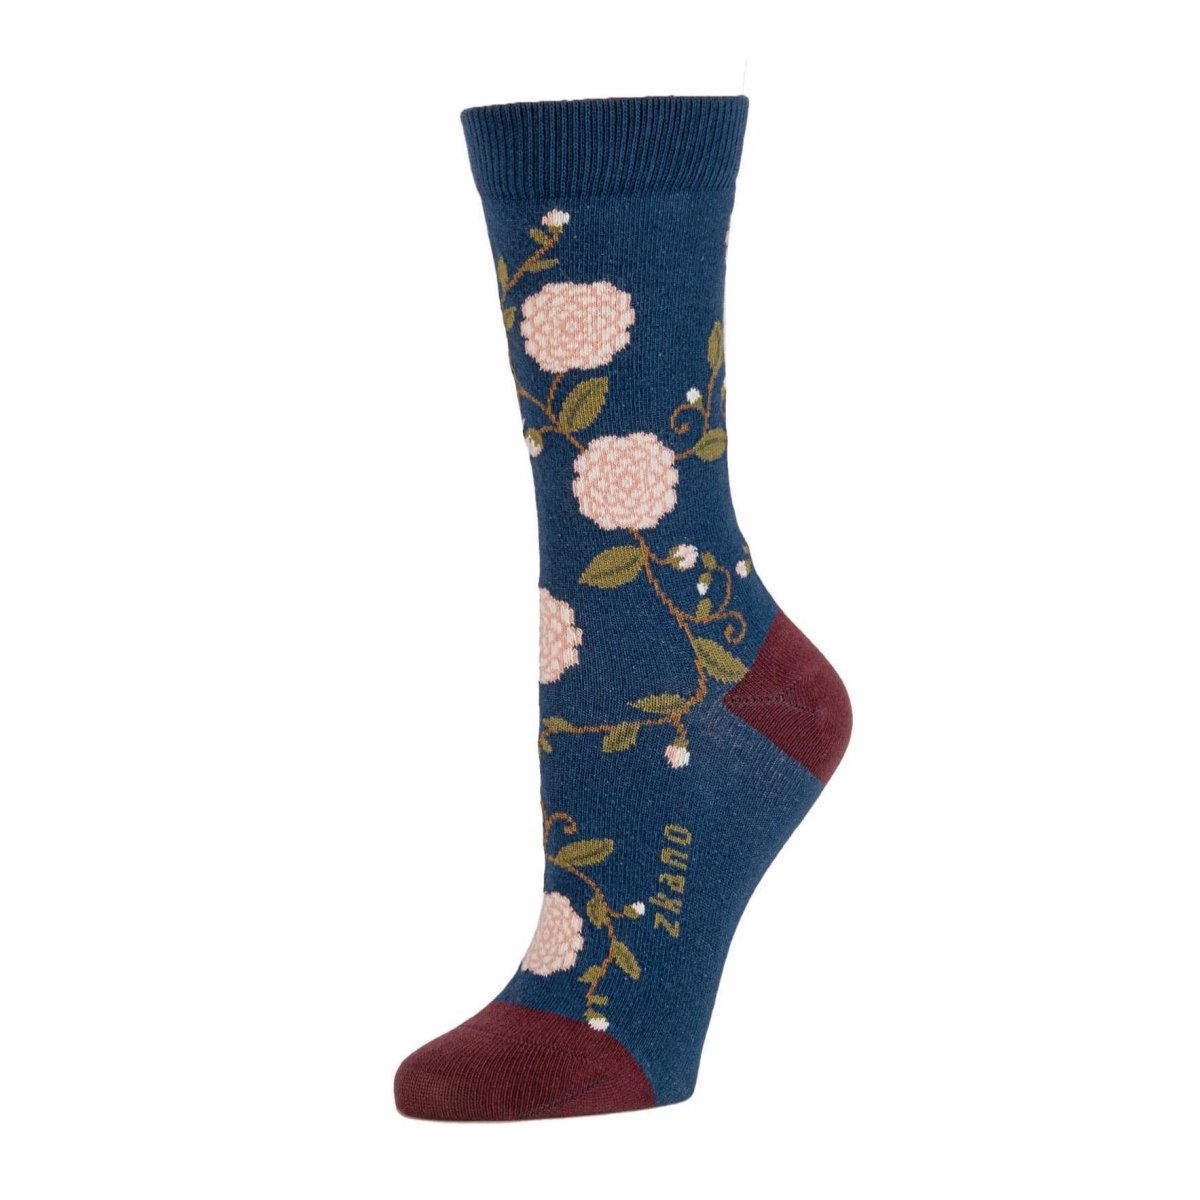 Dark blue sock with light pink and green floral pattern as well as a maroon colored heel and toe accent. The Camilla Floral Crew Sock in Blue Jean is from Zkano and made in Alabama, USA.